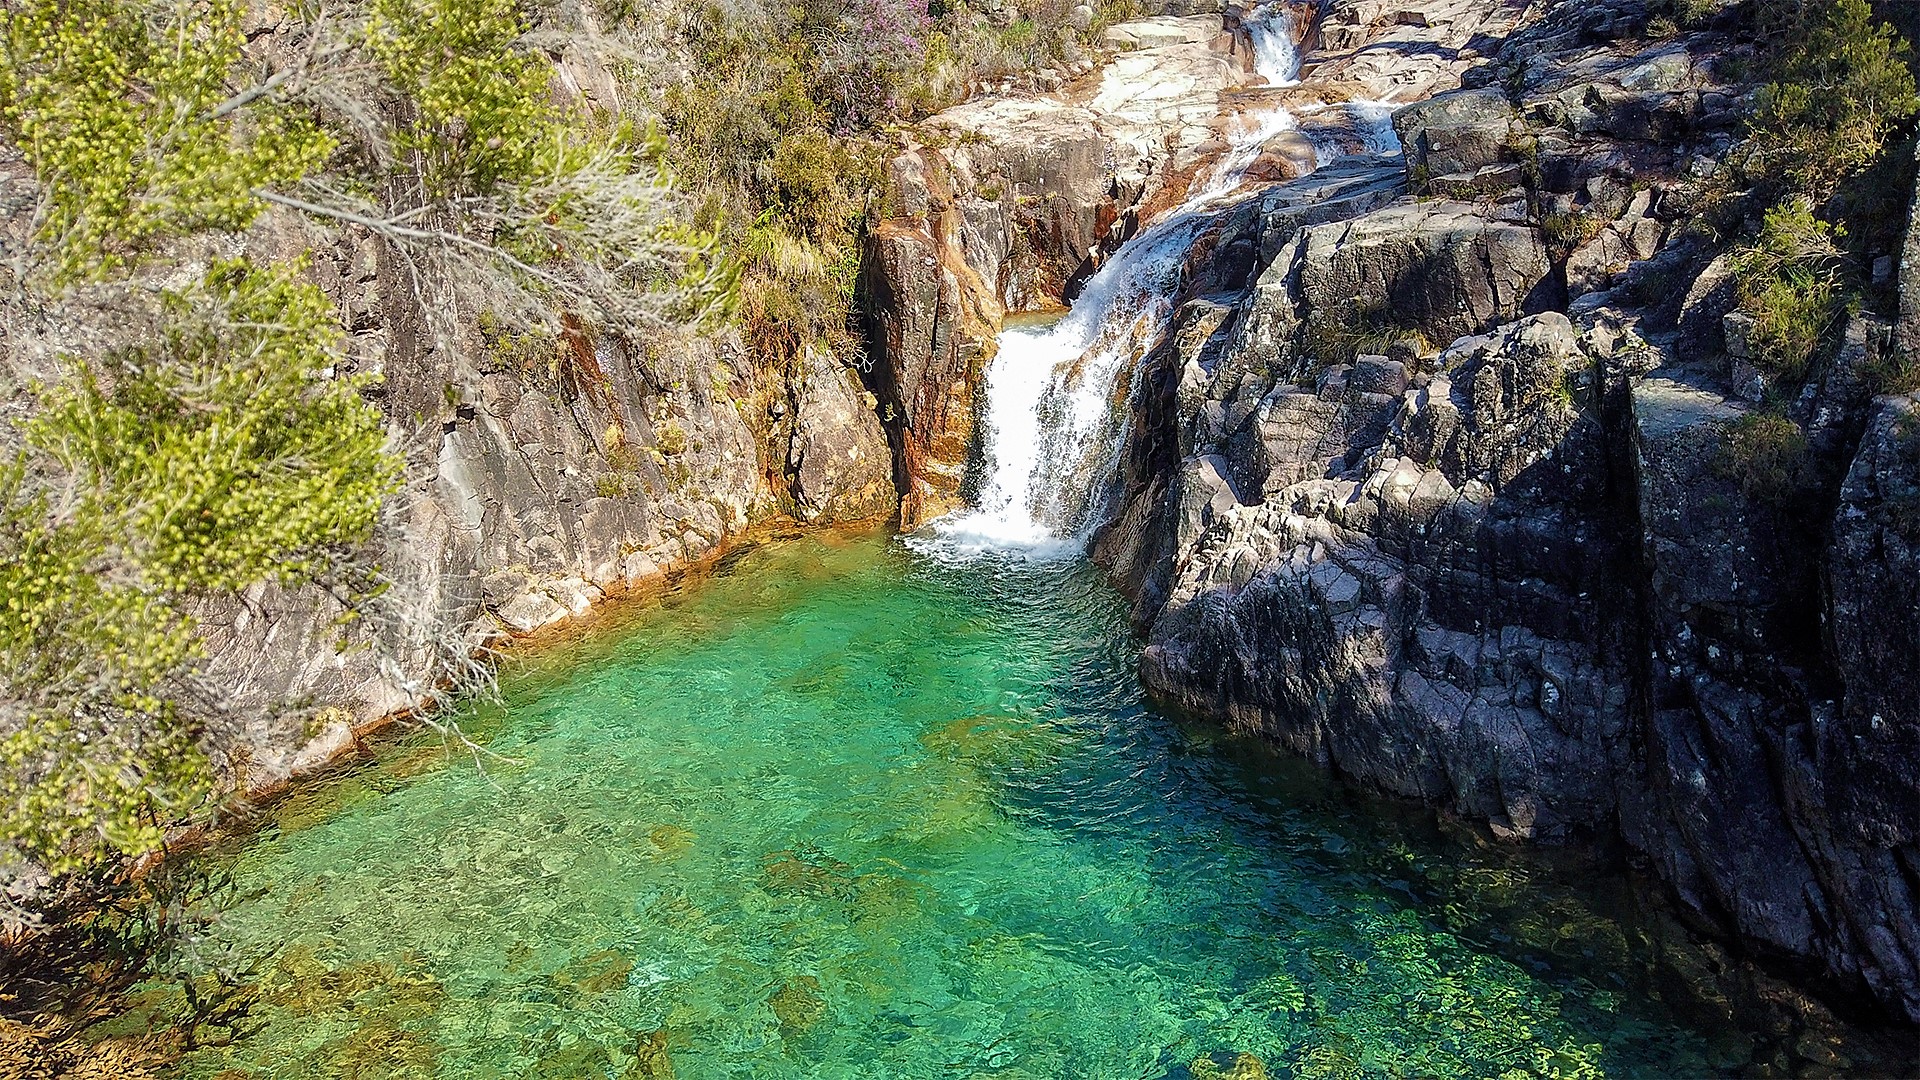 Small lagoon between rocks, with waterfall and green and crystal clear water